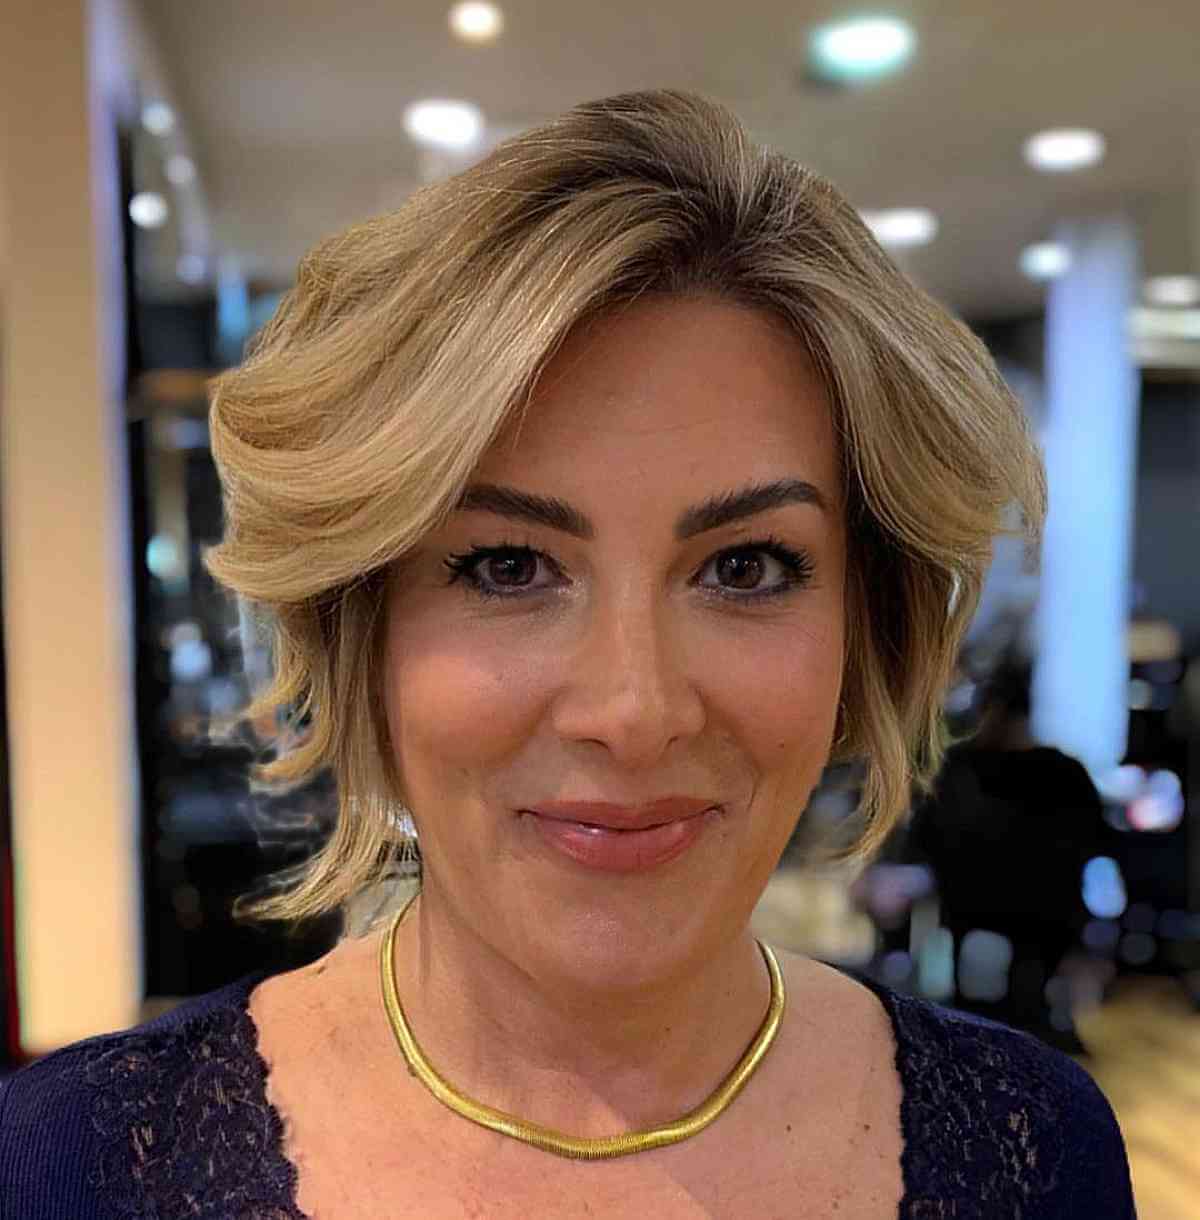 Tousled Blonde Bob Style for a 40-Year-Old Woman